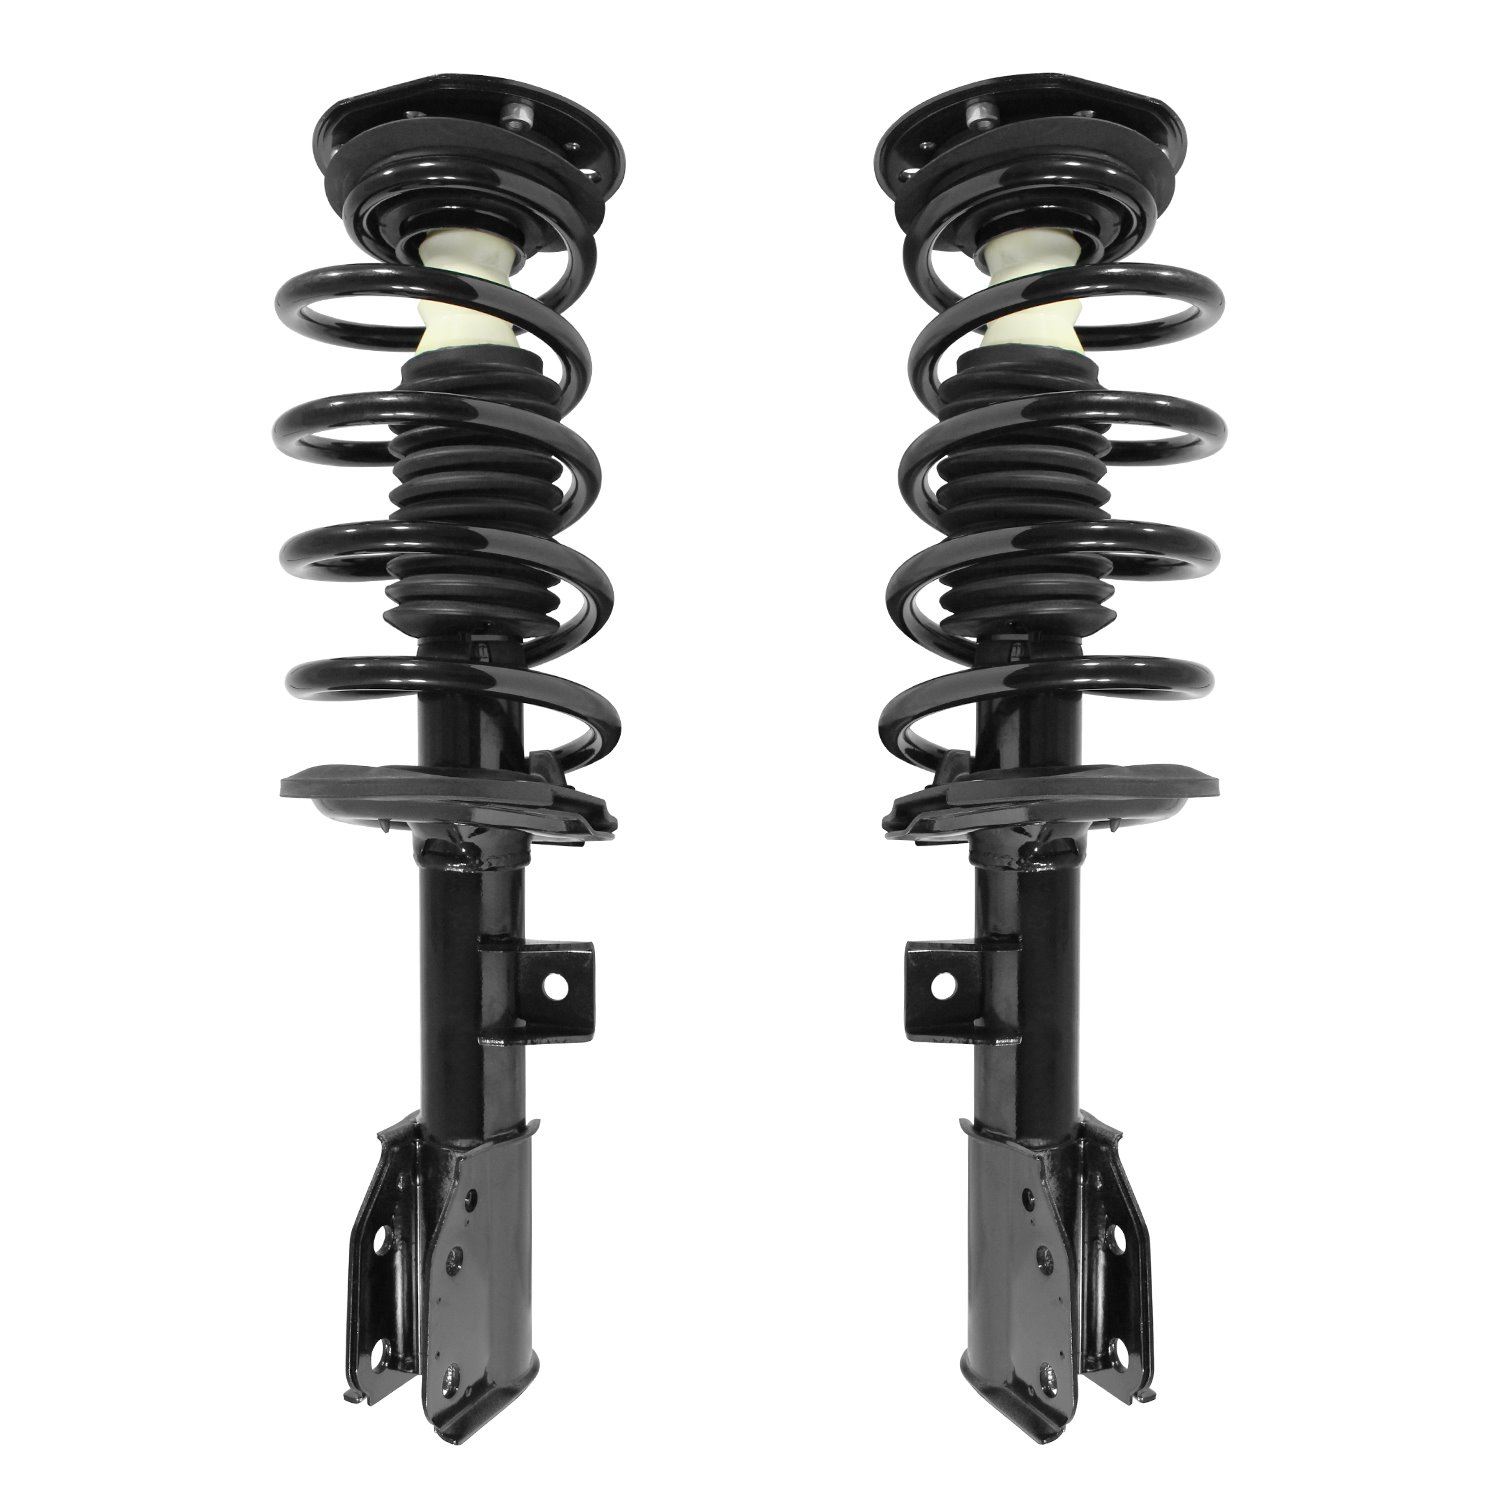 2-11463-11464-001 Suspension Strut & Coil Spring Assembly Set Fits Select Chevy Captiva Sport, Chevy Equinox, GMC Terrain